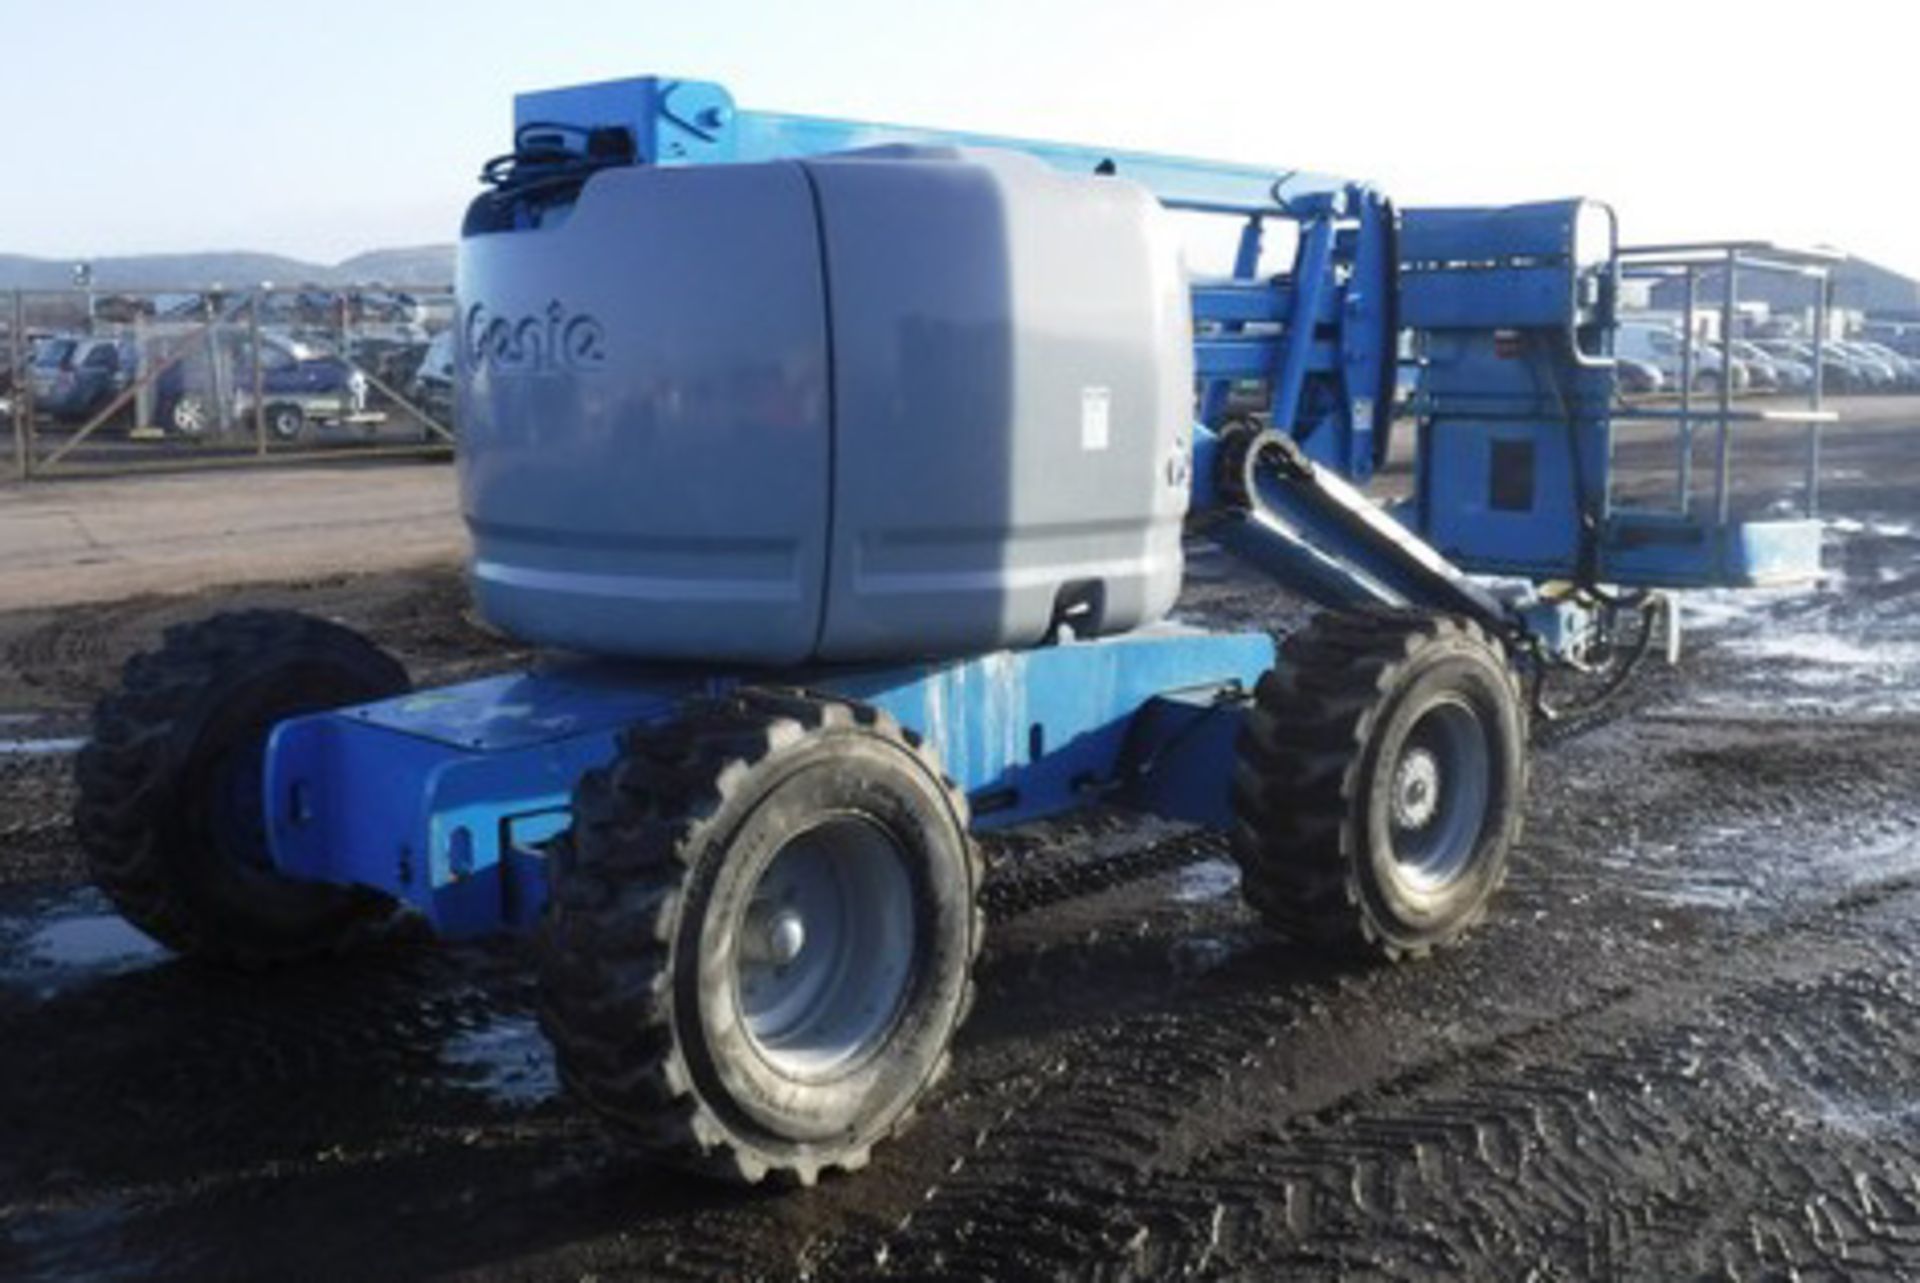 2000 GENIE MODEL Z45-25, S/N 15155, 8046HRS (NOT VERIFIED), LIFT CAPACITY - 230 - Image 14 of 17